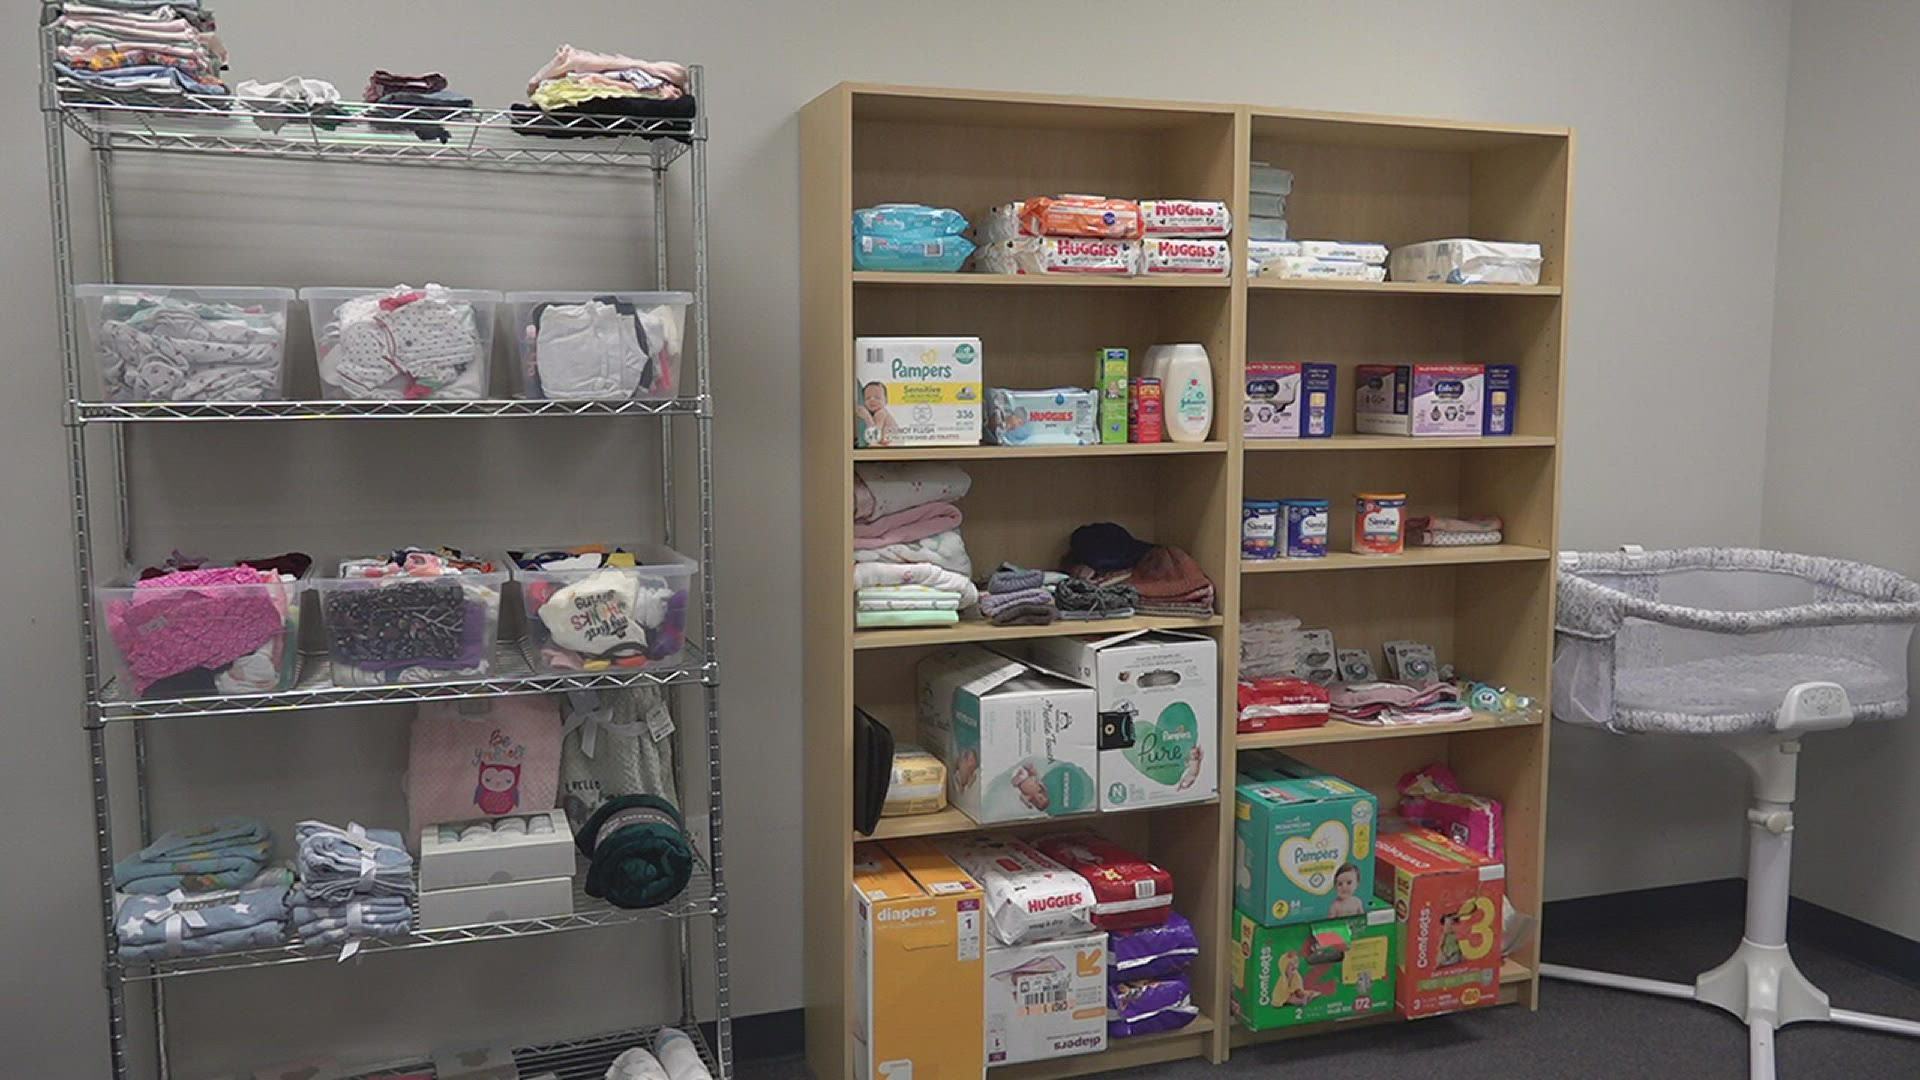 The new year is expected to bring a new opportunity for Beaumont mothers in need to get help for free.